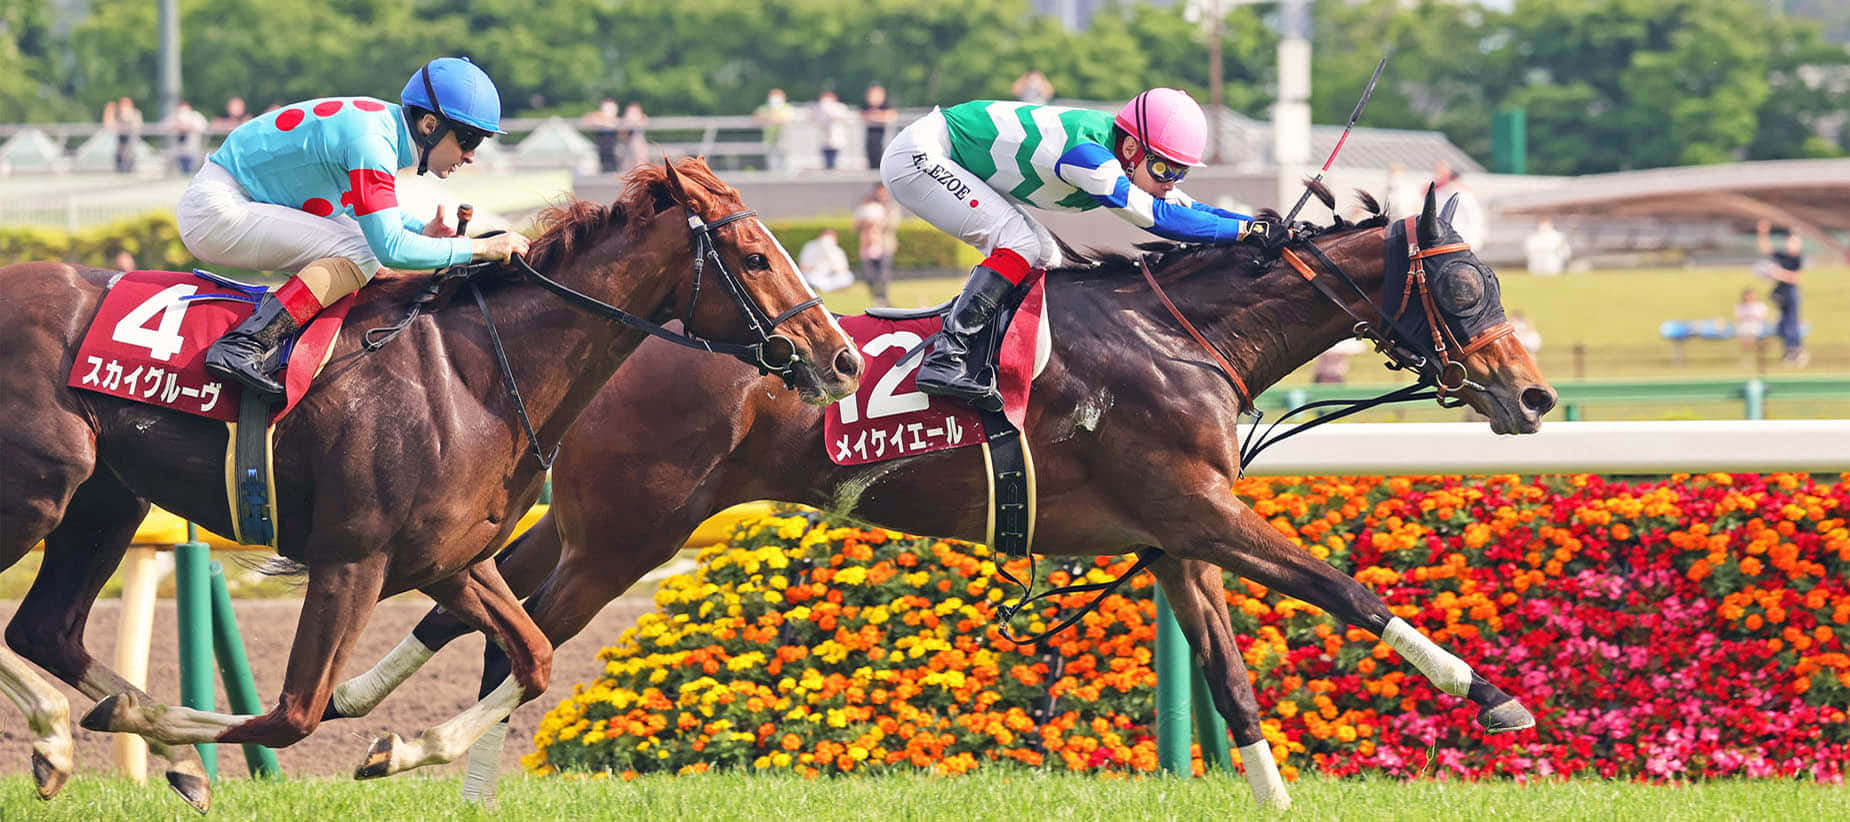 The Preakness Horses of 2022 Ready to Race